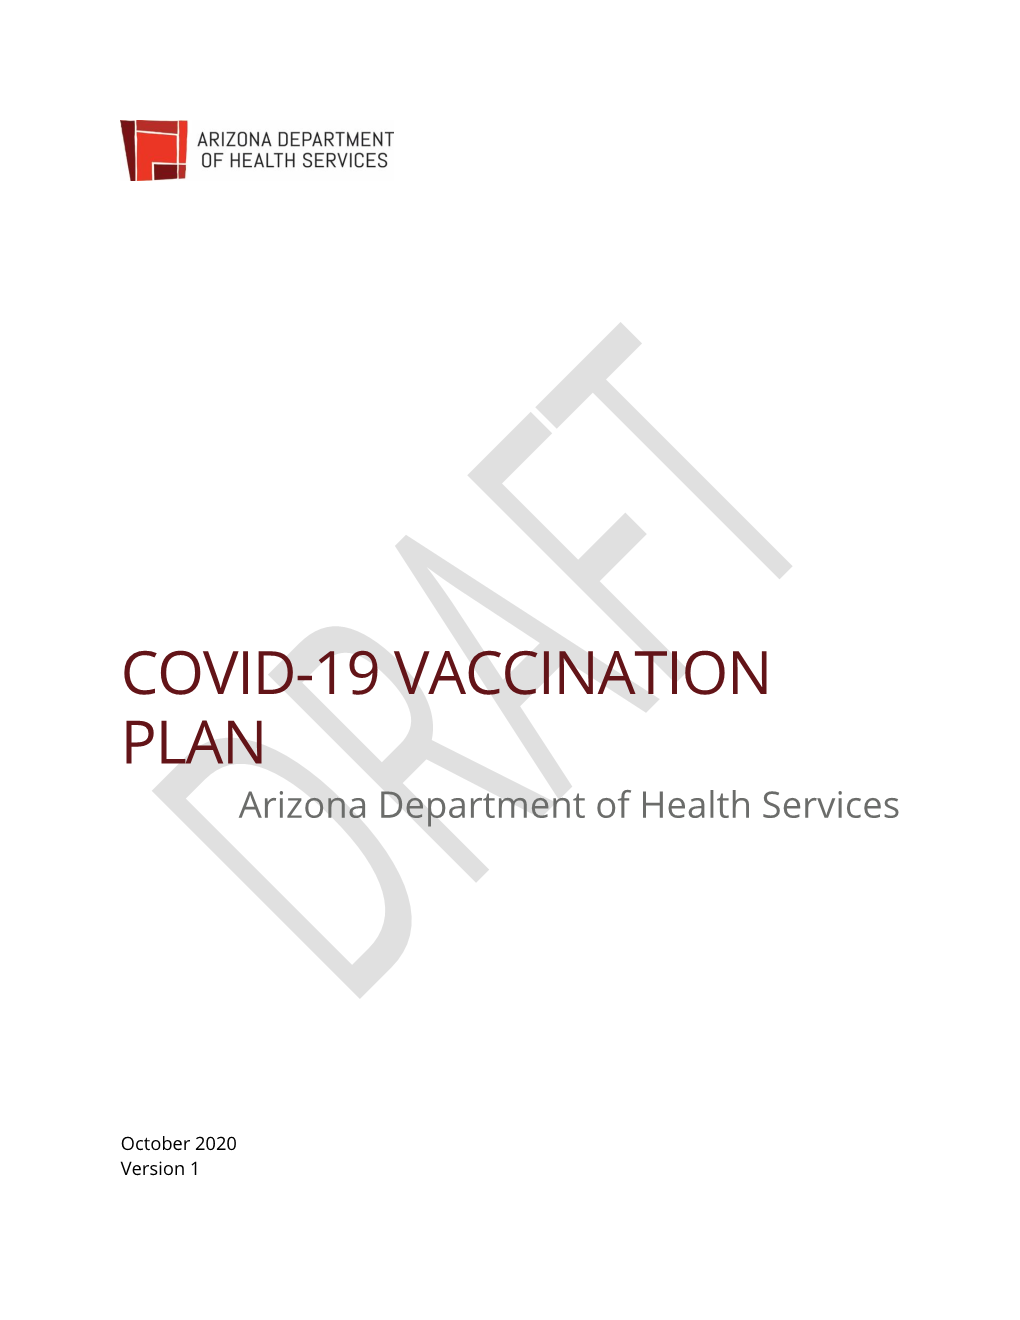 COVID-19 VACCINATION PLAN Arizona Department of Health Services